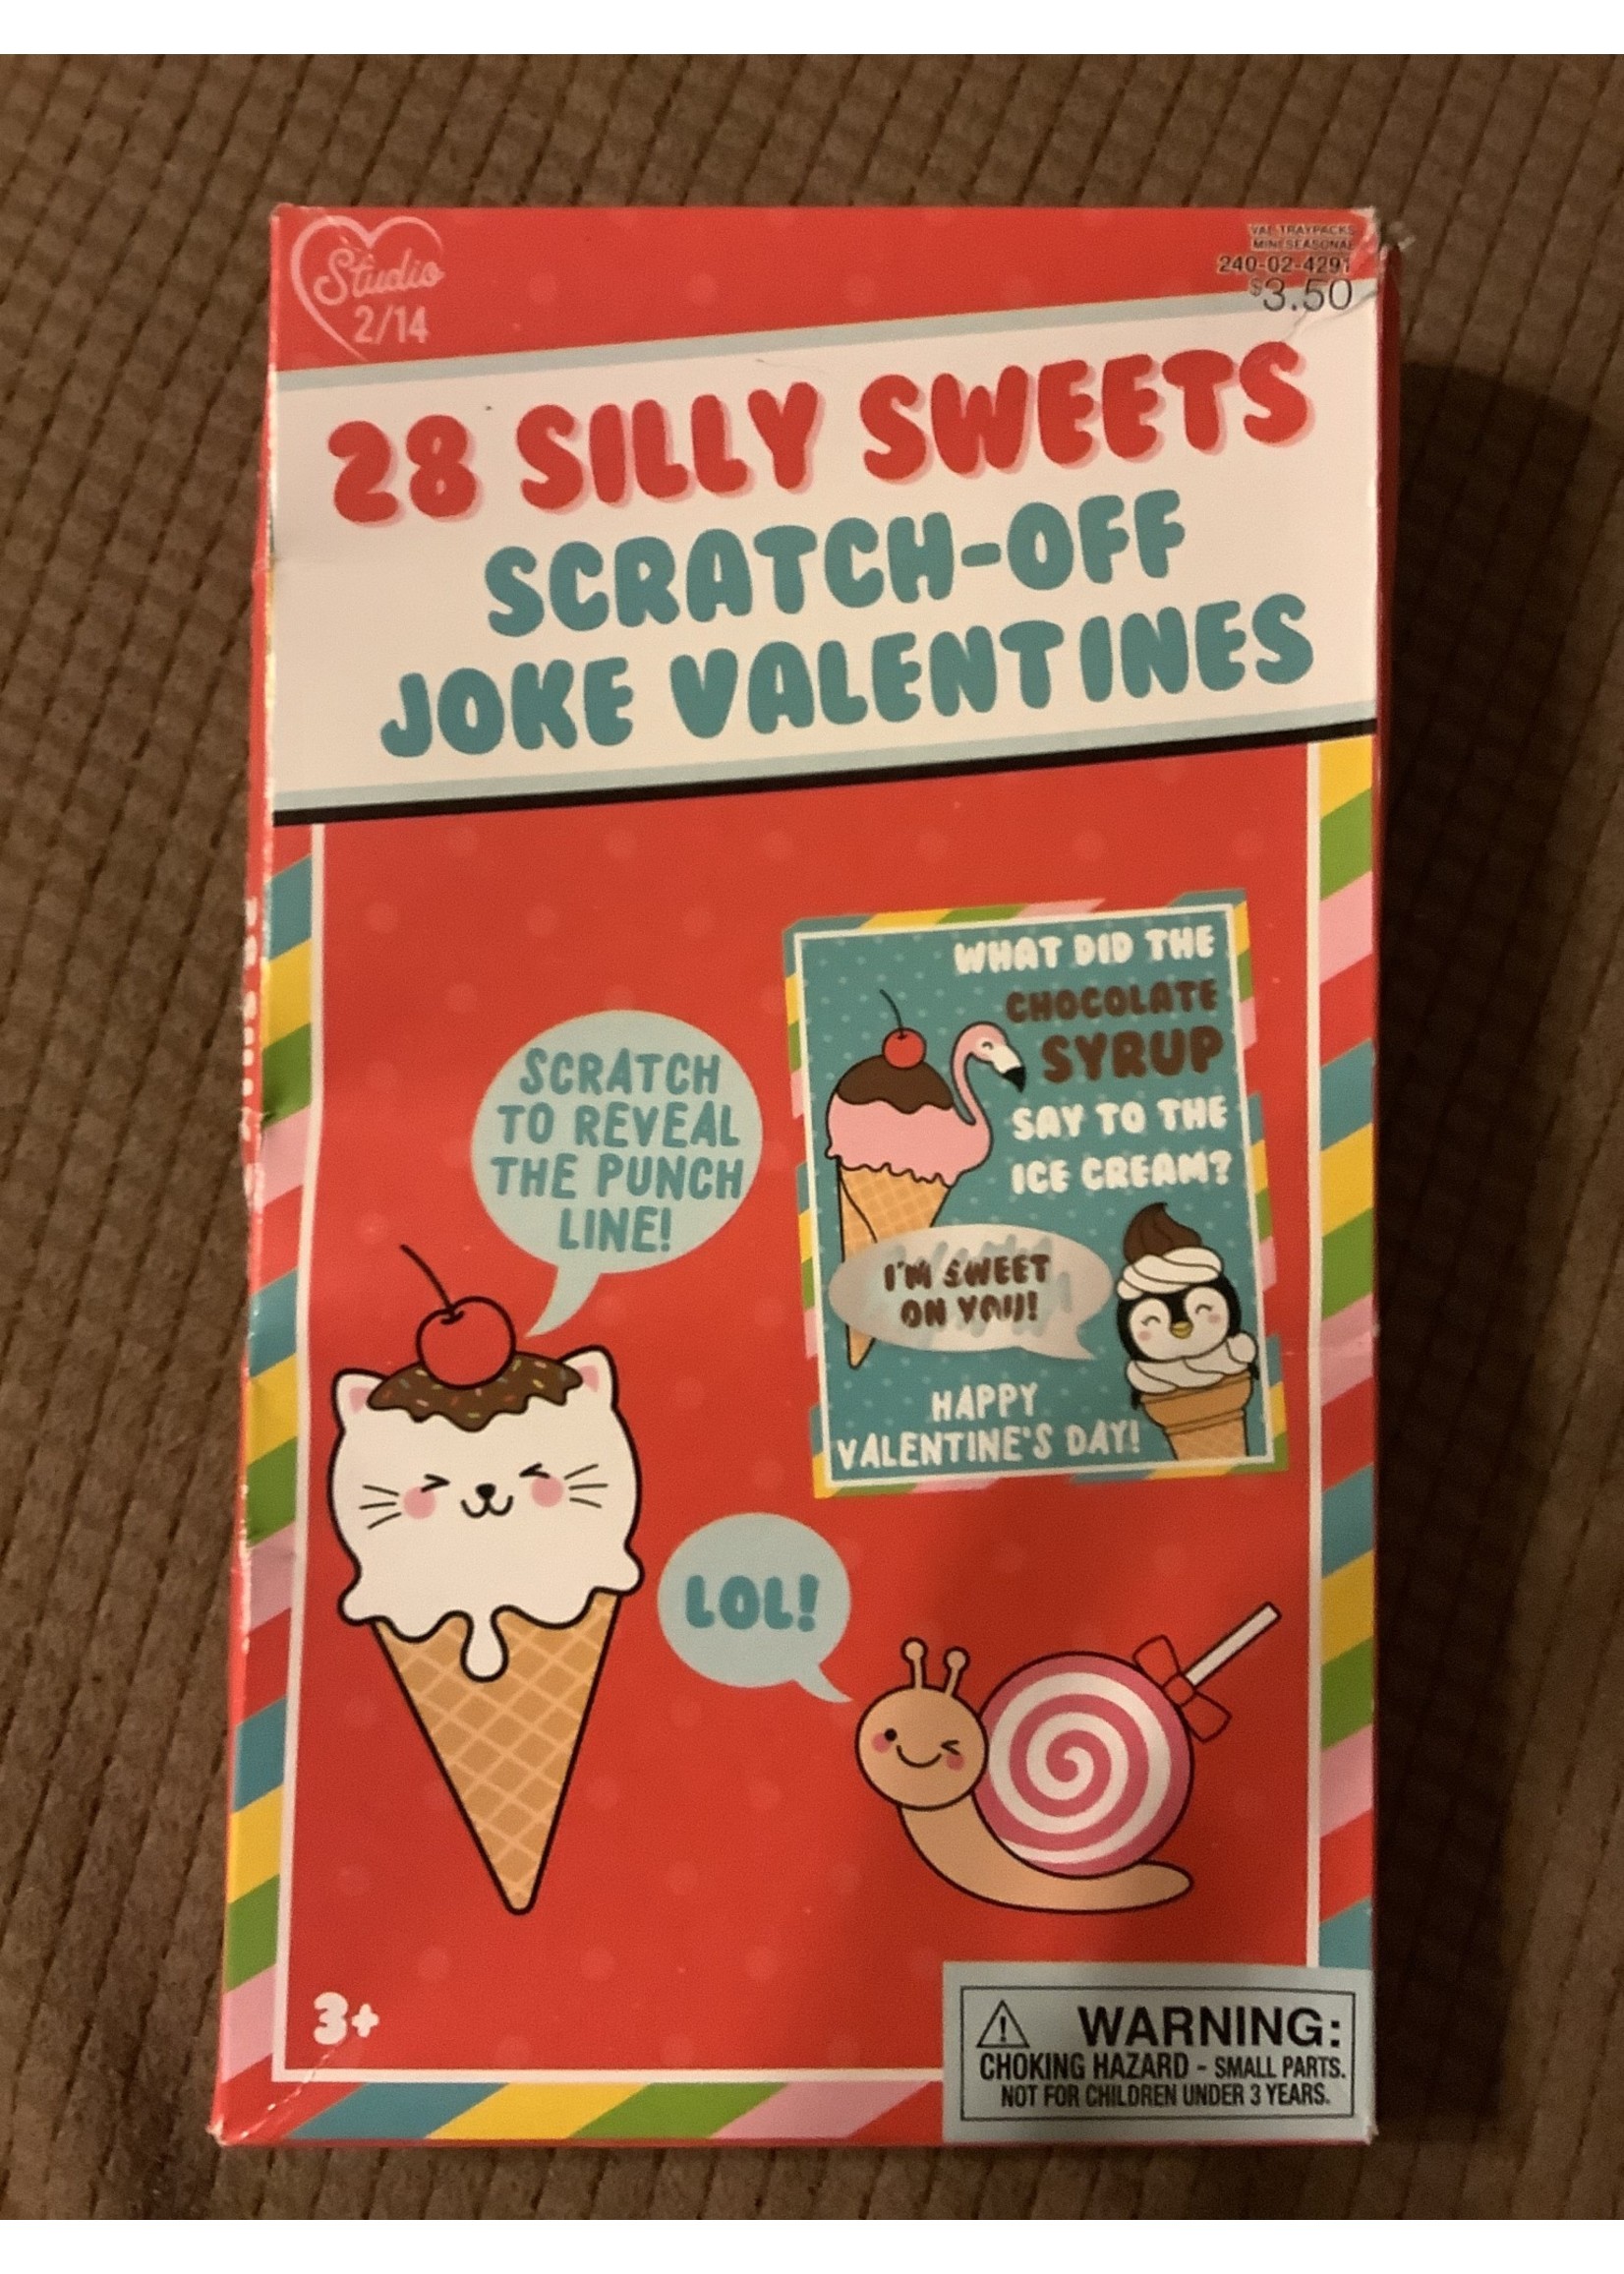 28ct Silly Sweets Scratch-Off Joke Valentines